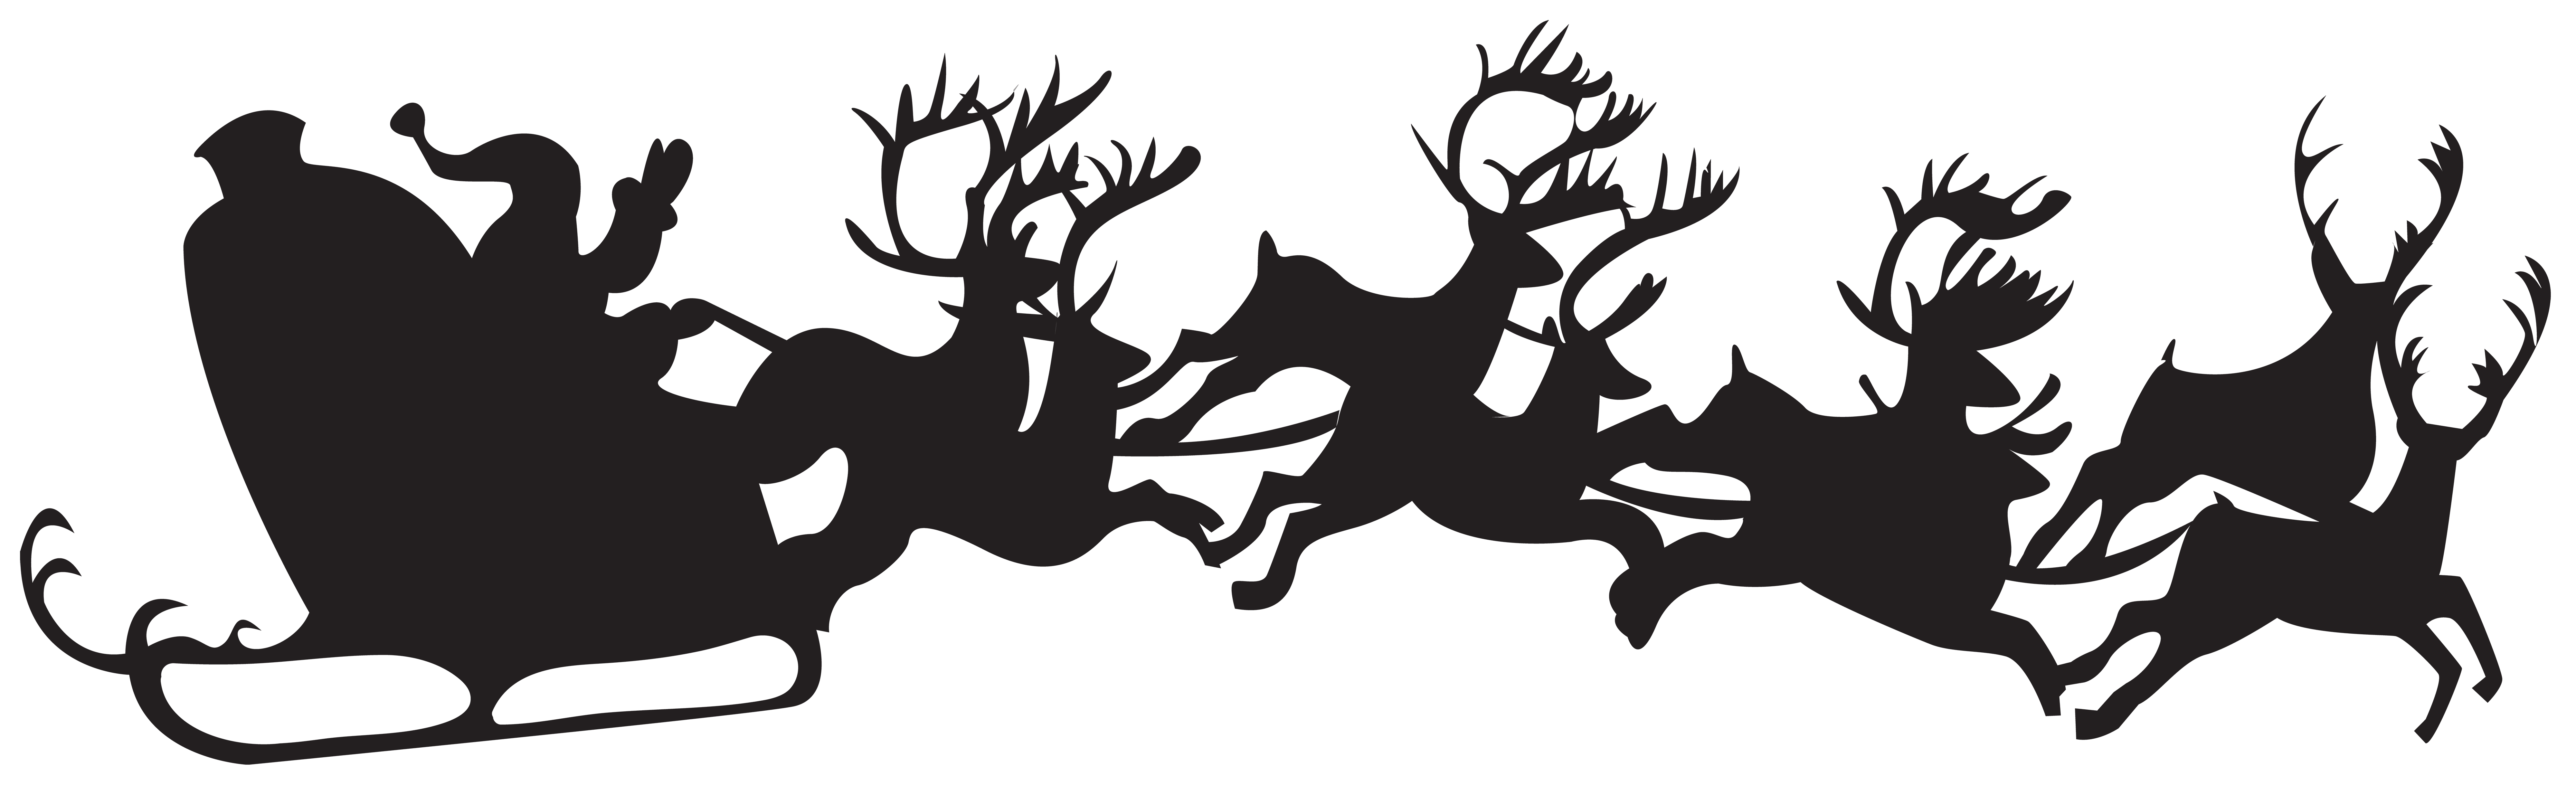 Christmas Silhouette Santa Claus With Sleigh Png Clip Art Gallery Yopriceville High Quality Images And Transparent Png Free Clipart